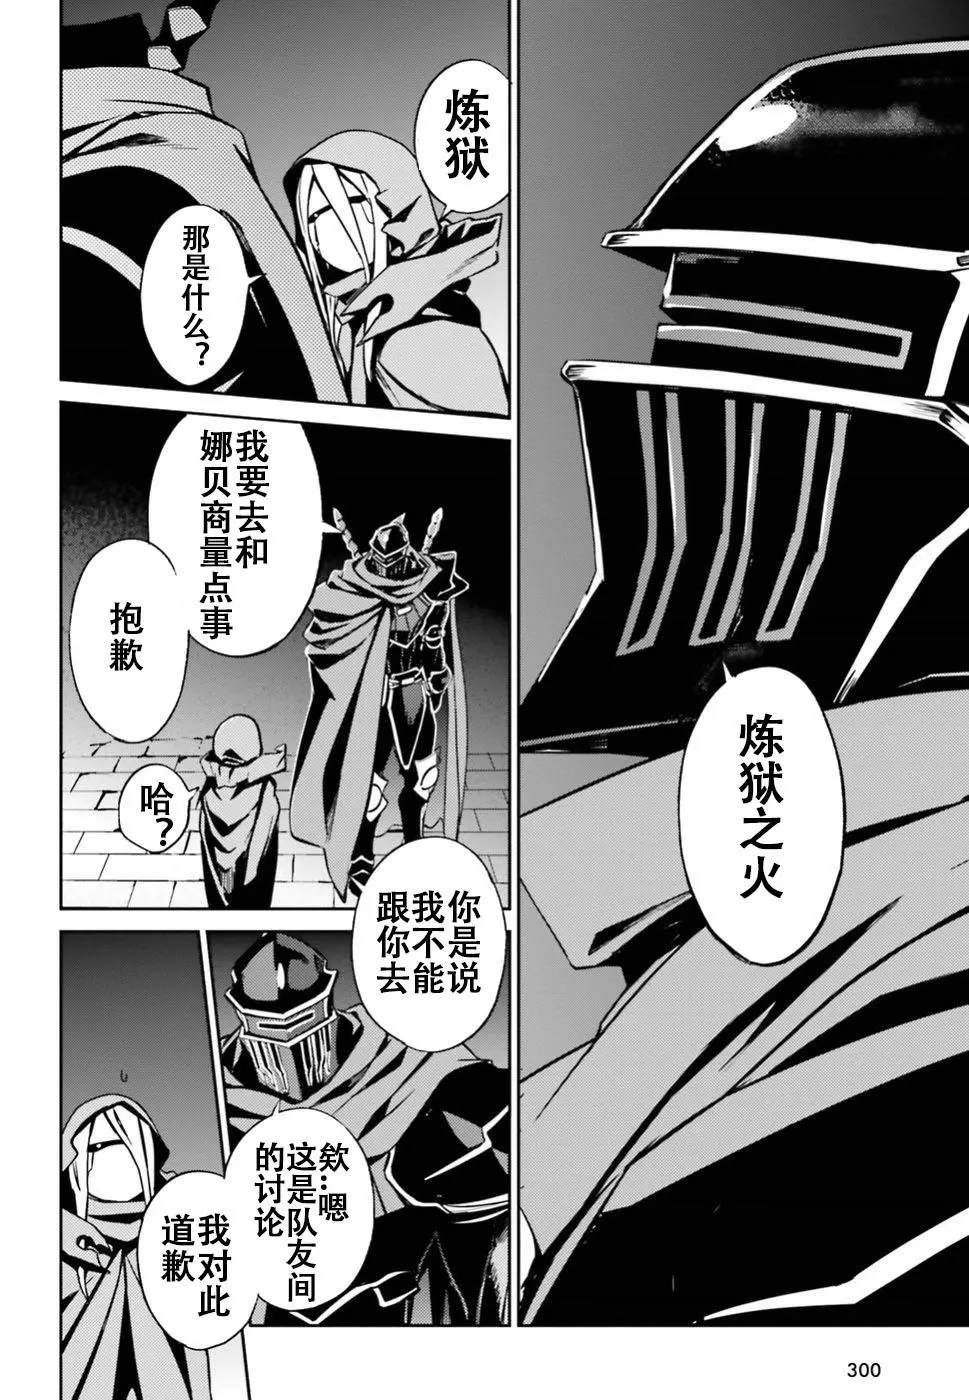 OVERLORD - 第47話 - 2